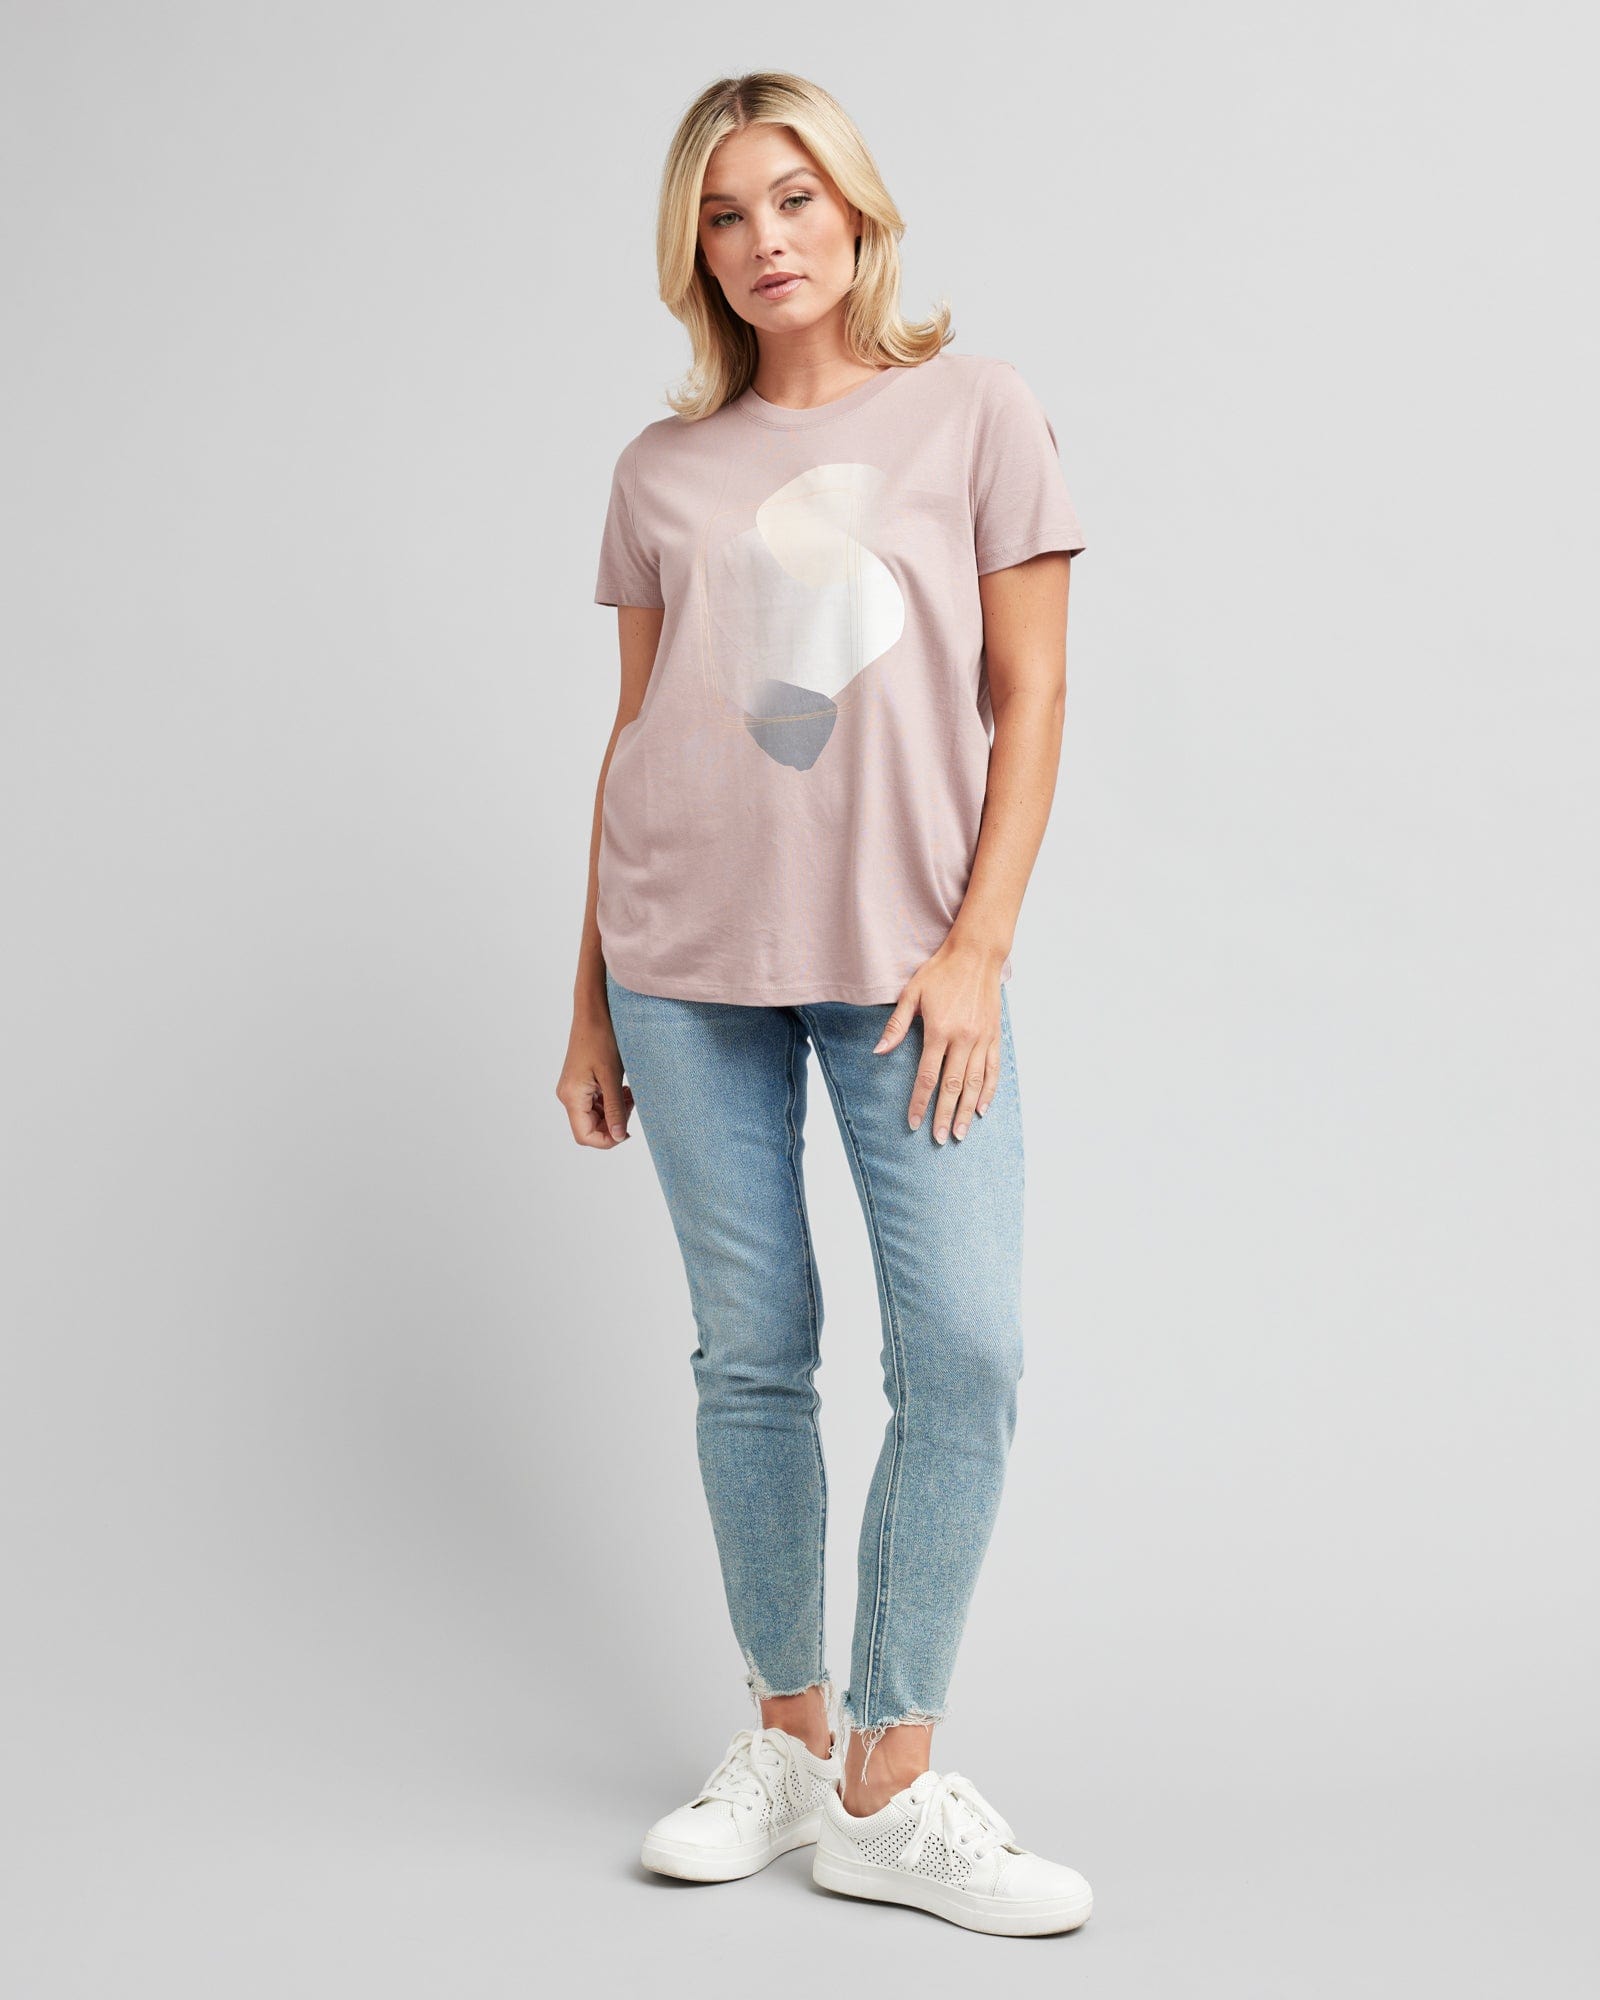 Woman in a short sleeve, pink graphic tee with a silver design on front